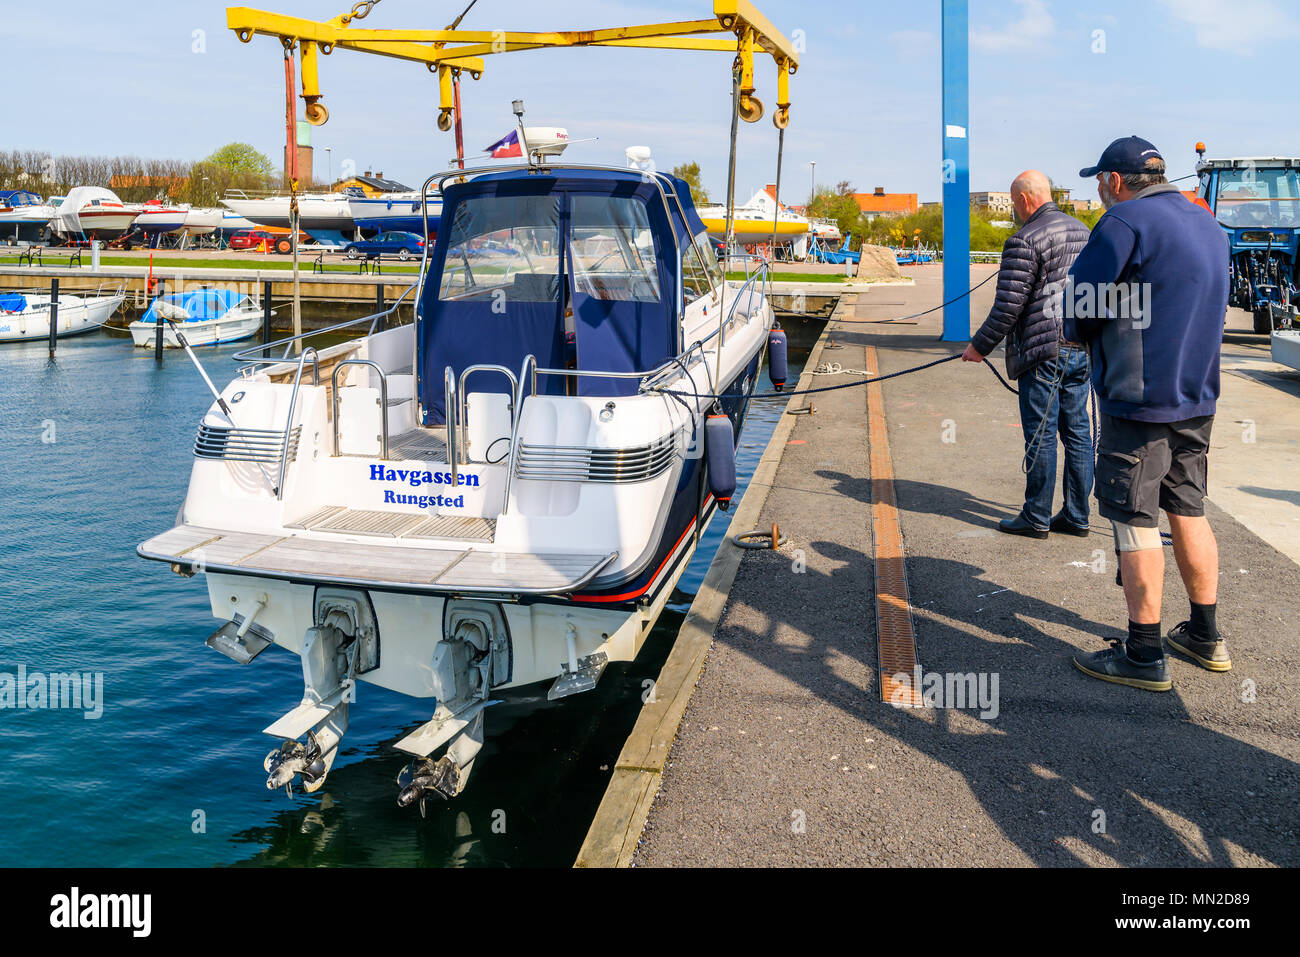 Hoganas, Sweden - April 30, 2018: Documentary of everyday life and place. The launching of a motorboat using a harbor crane. Stock Photo